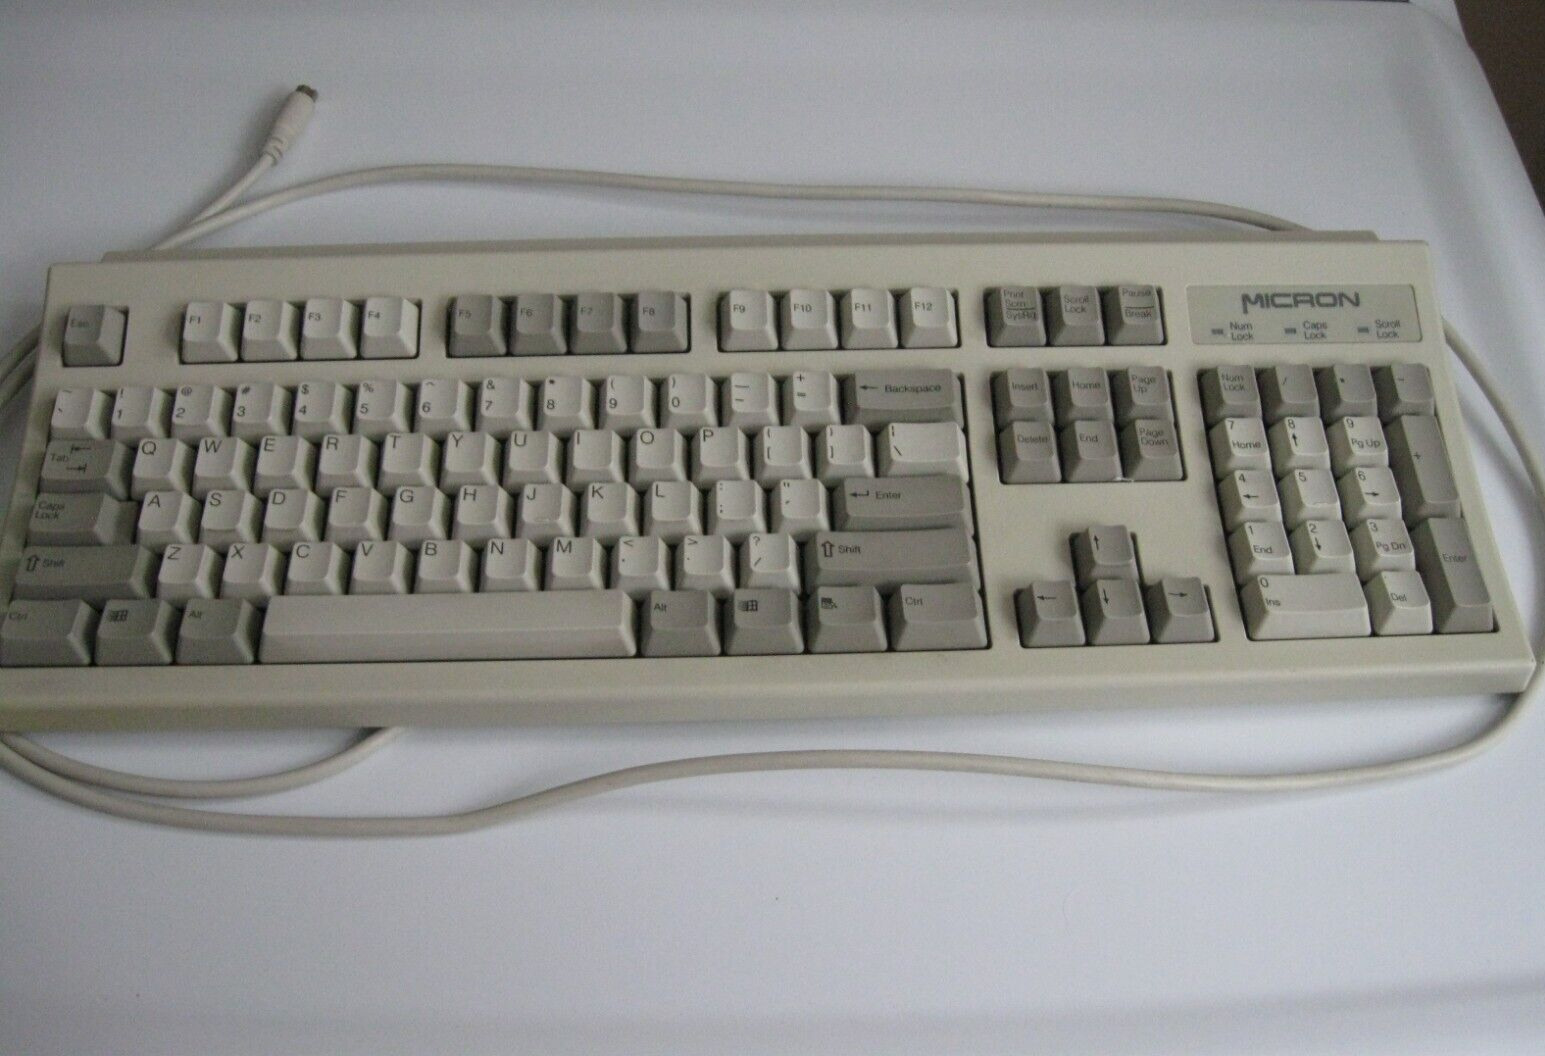 NMB Technologies Micron RT6856TW PS2 Beige Wired Keyboard for Windows 95